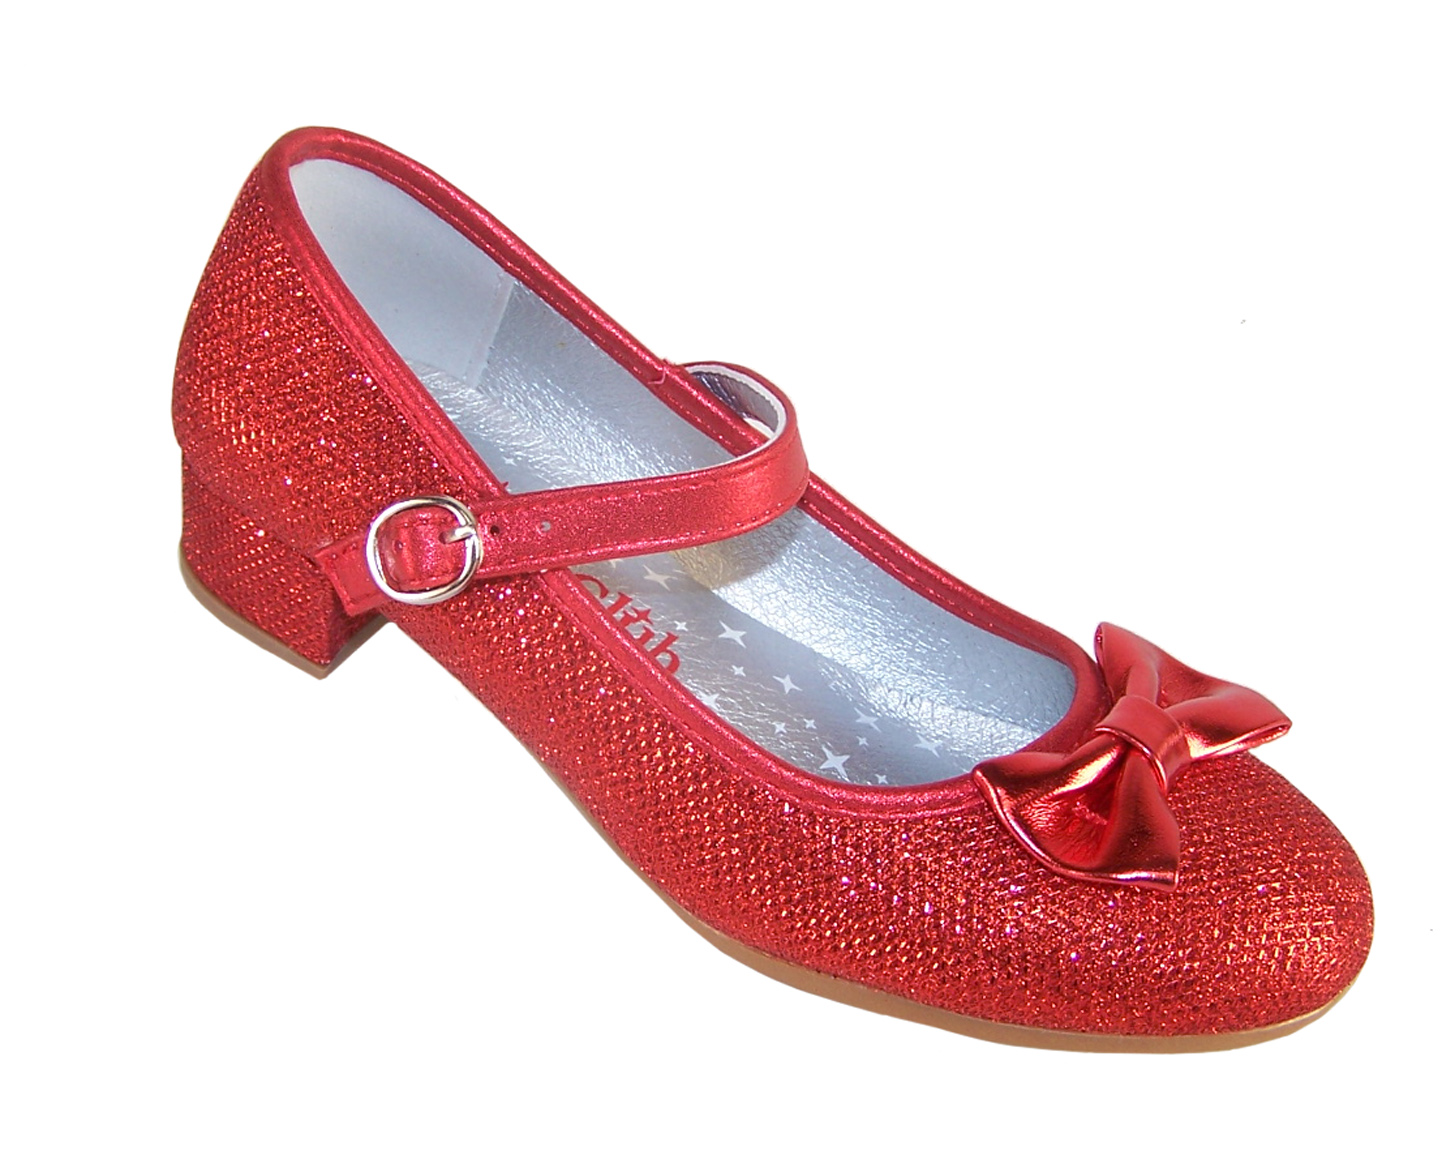 Girls red sparkly heeled shoes with red heart bag-3984